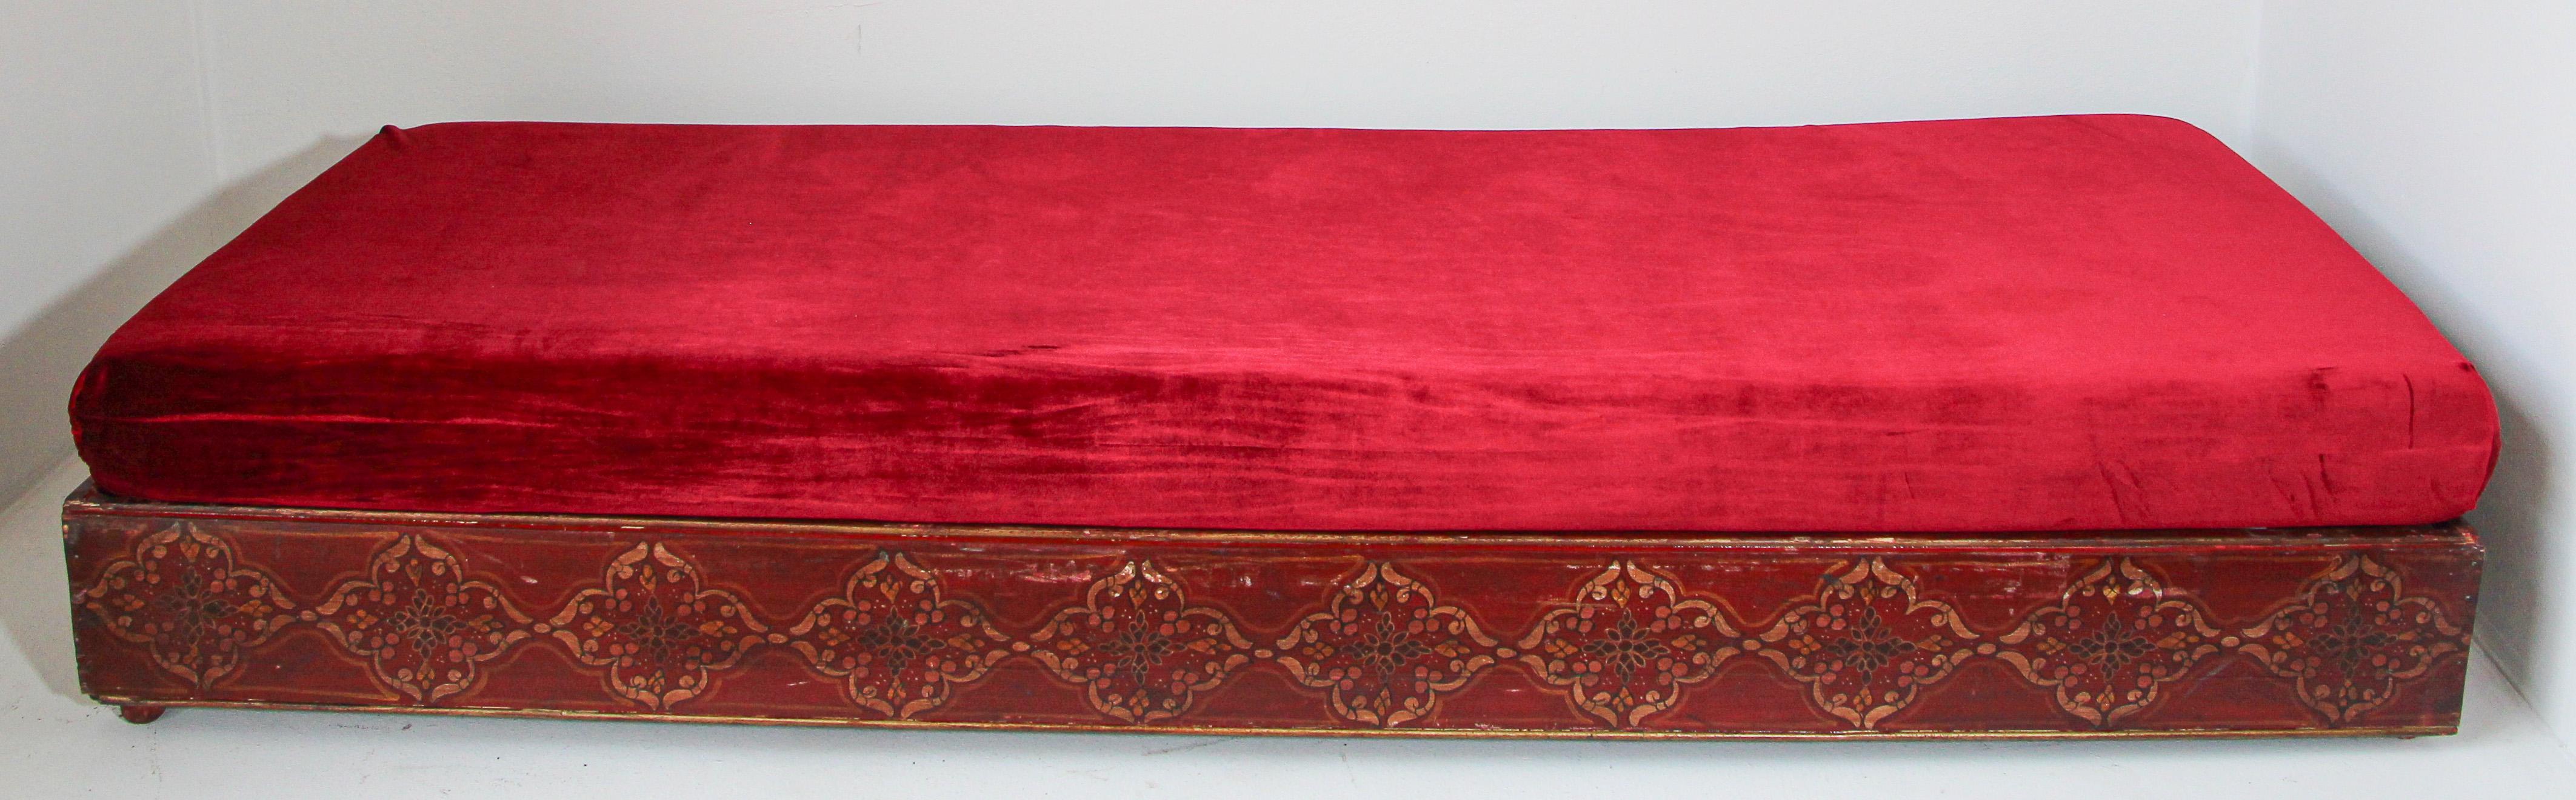 Vintage Moroccan low wooden bench, day bed.
Traditional Moroccan sofa, low bench handcrafted in a wooden base hand-painted with traditional geometric design, top cushion foam covered with a red velvet fabric.
Moroccan upholstered settee with